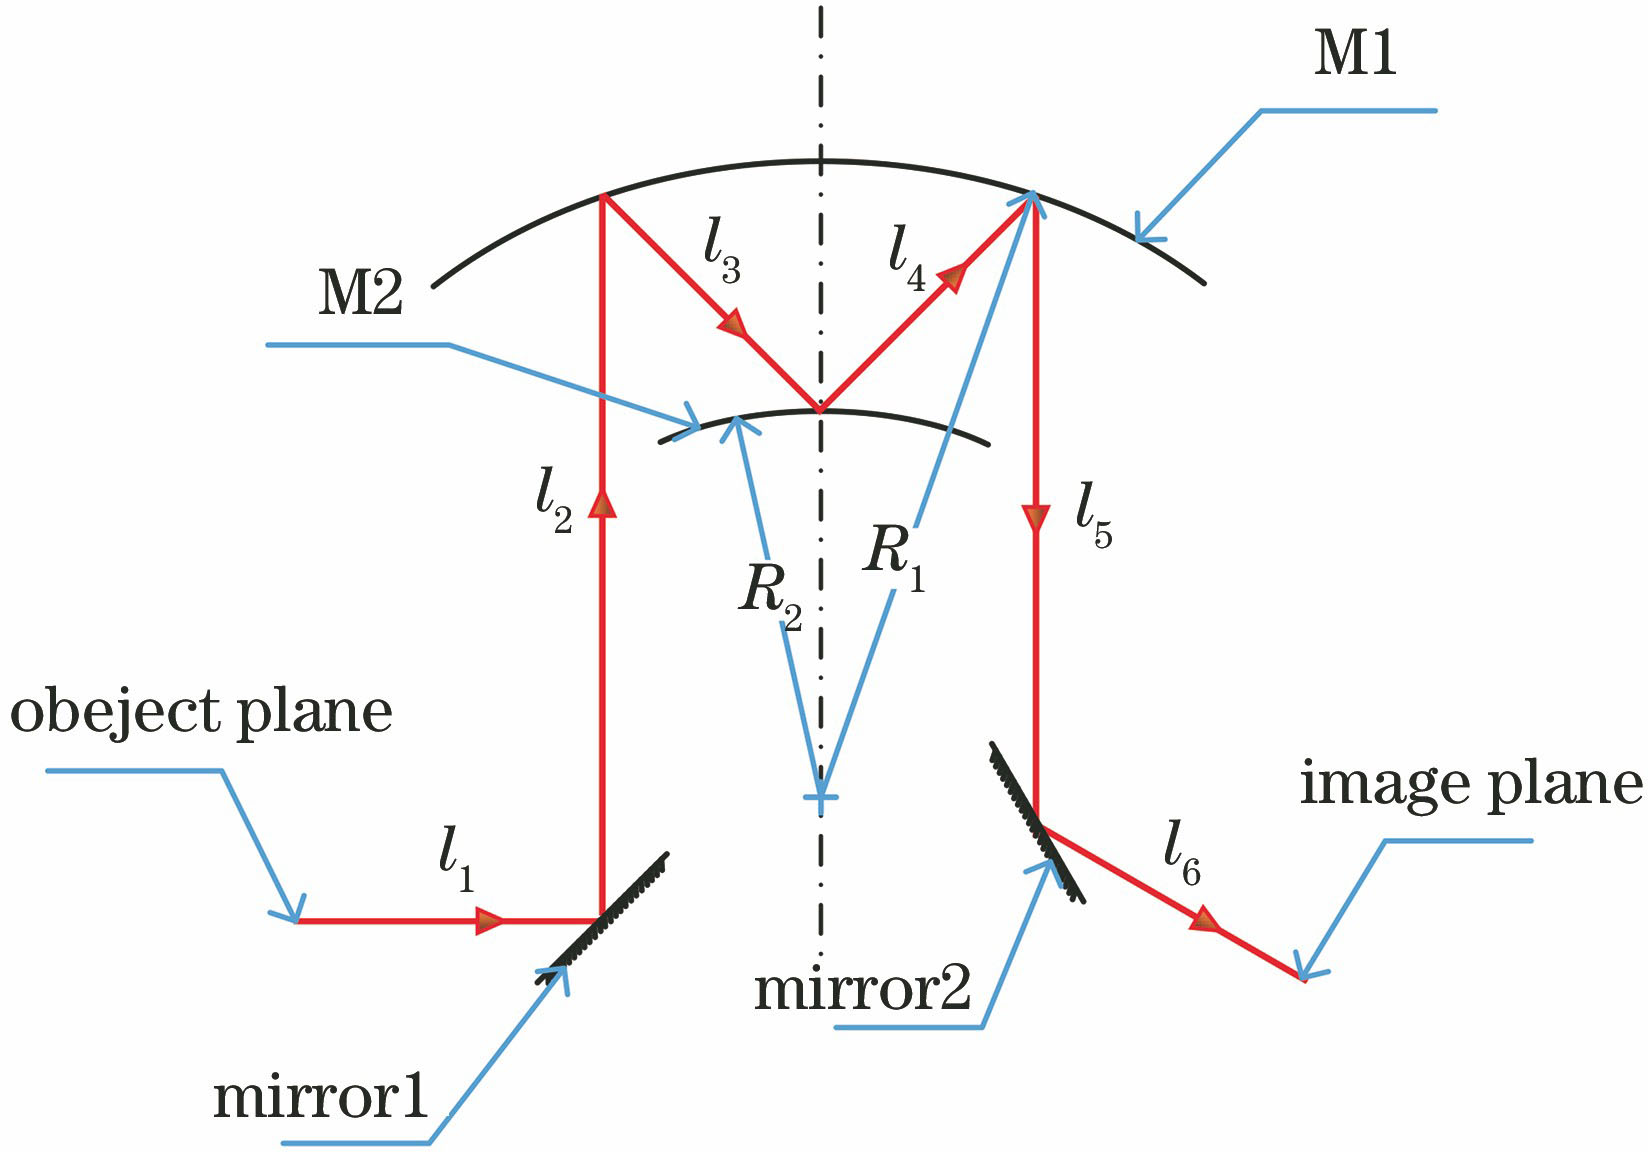 Schematic of reflective projection system